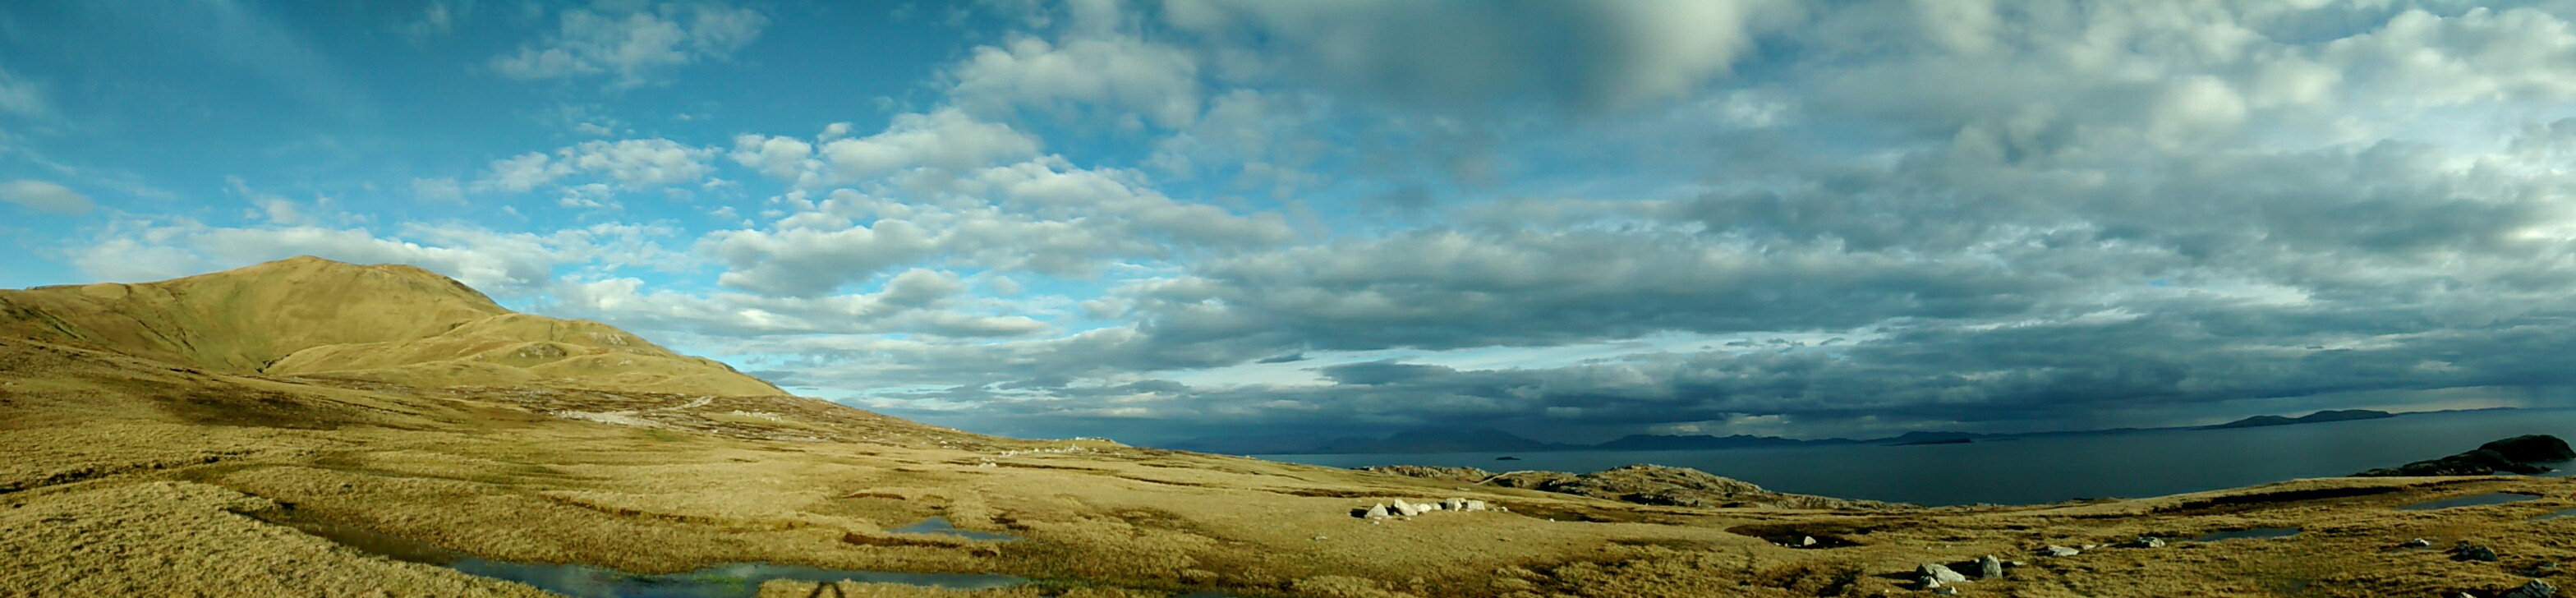 A panoramic view of the island with Knockmore to the left